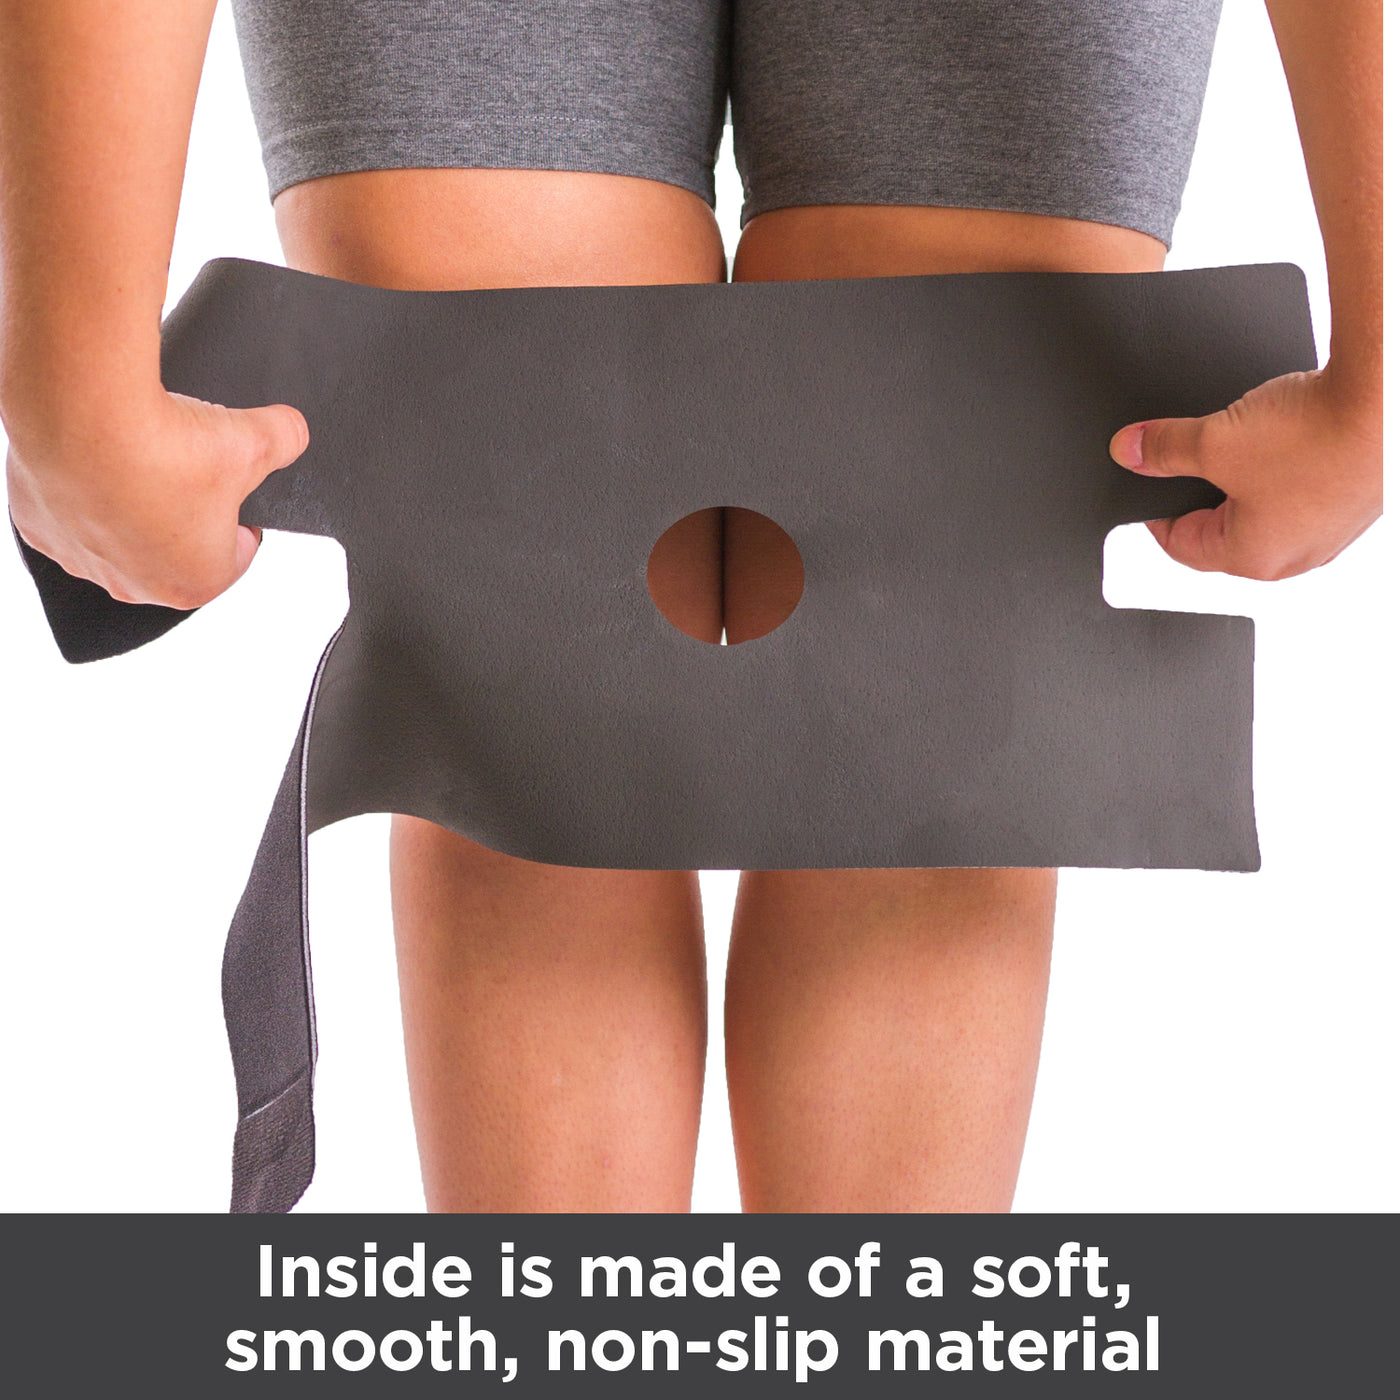 Inside of active knee support is made of a soft, sooth, non-slip material